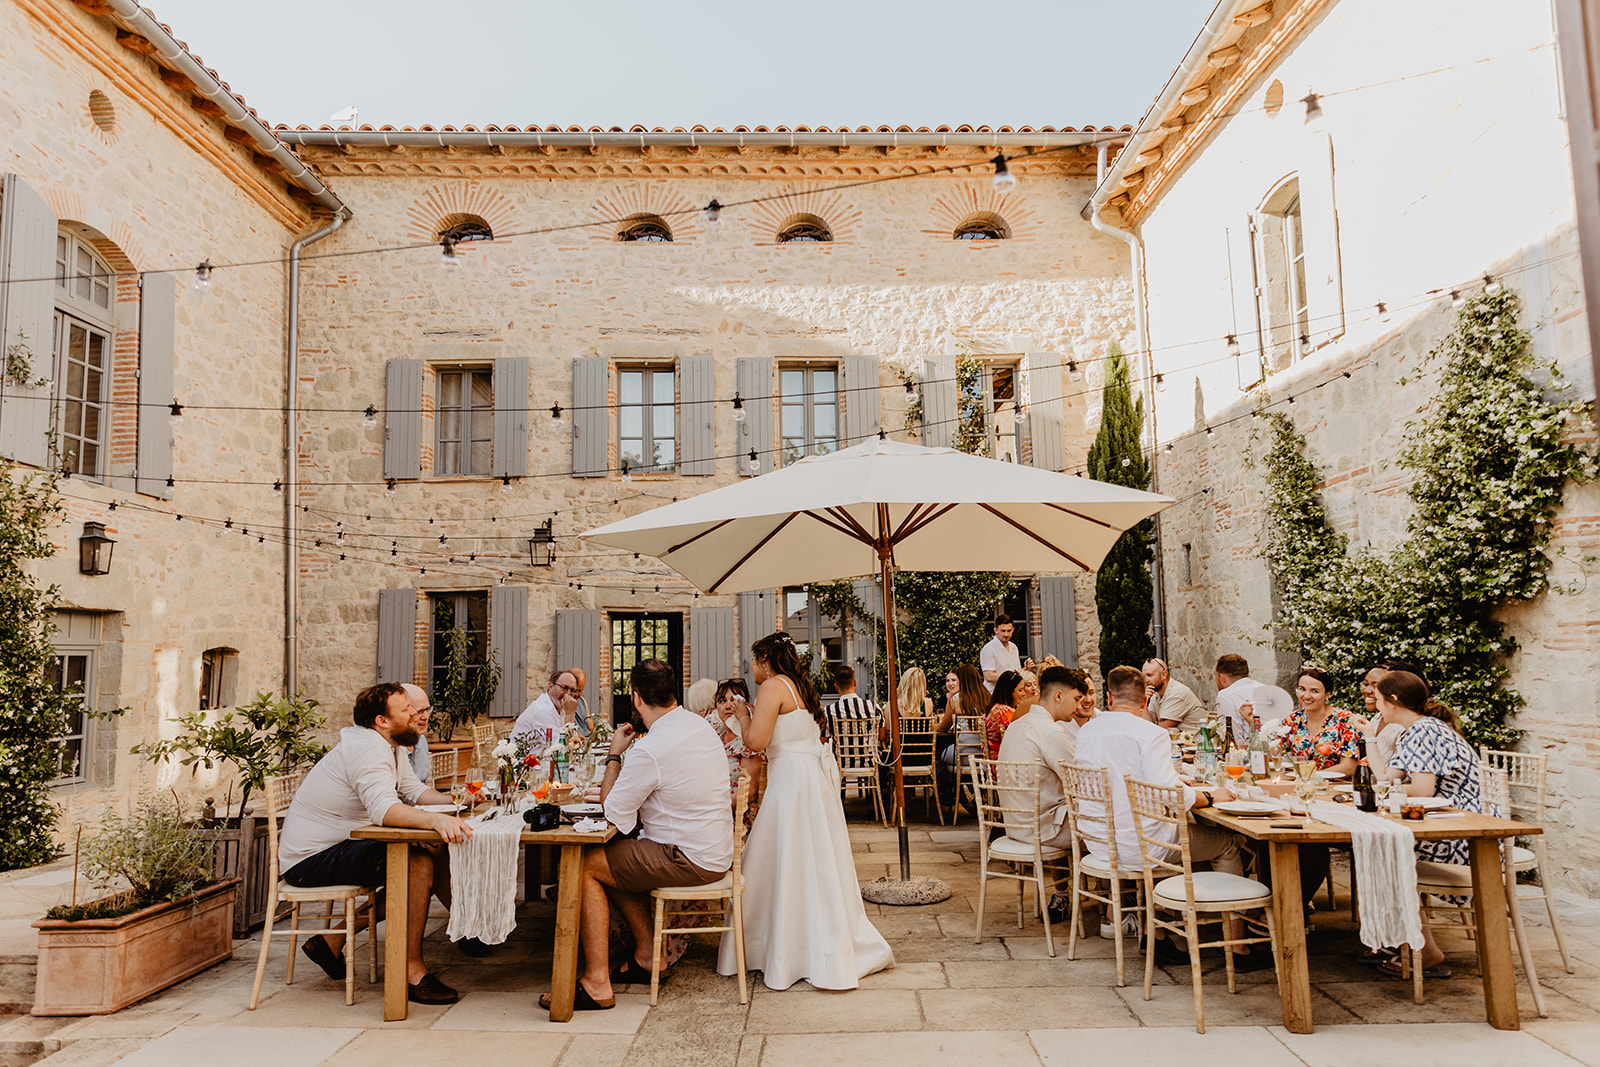 Reception at a Destination Wedding in France. Photography & Videography by OliveJoy Photography